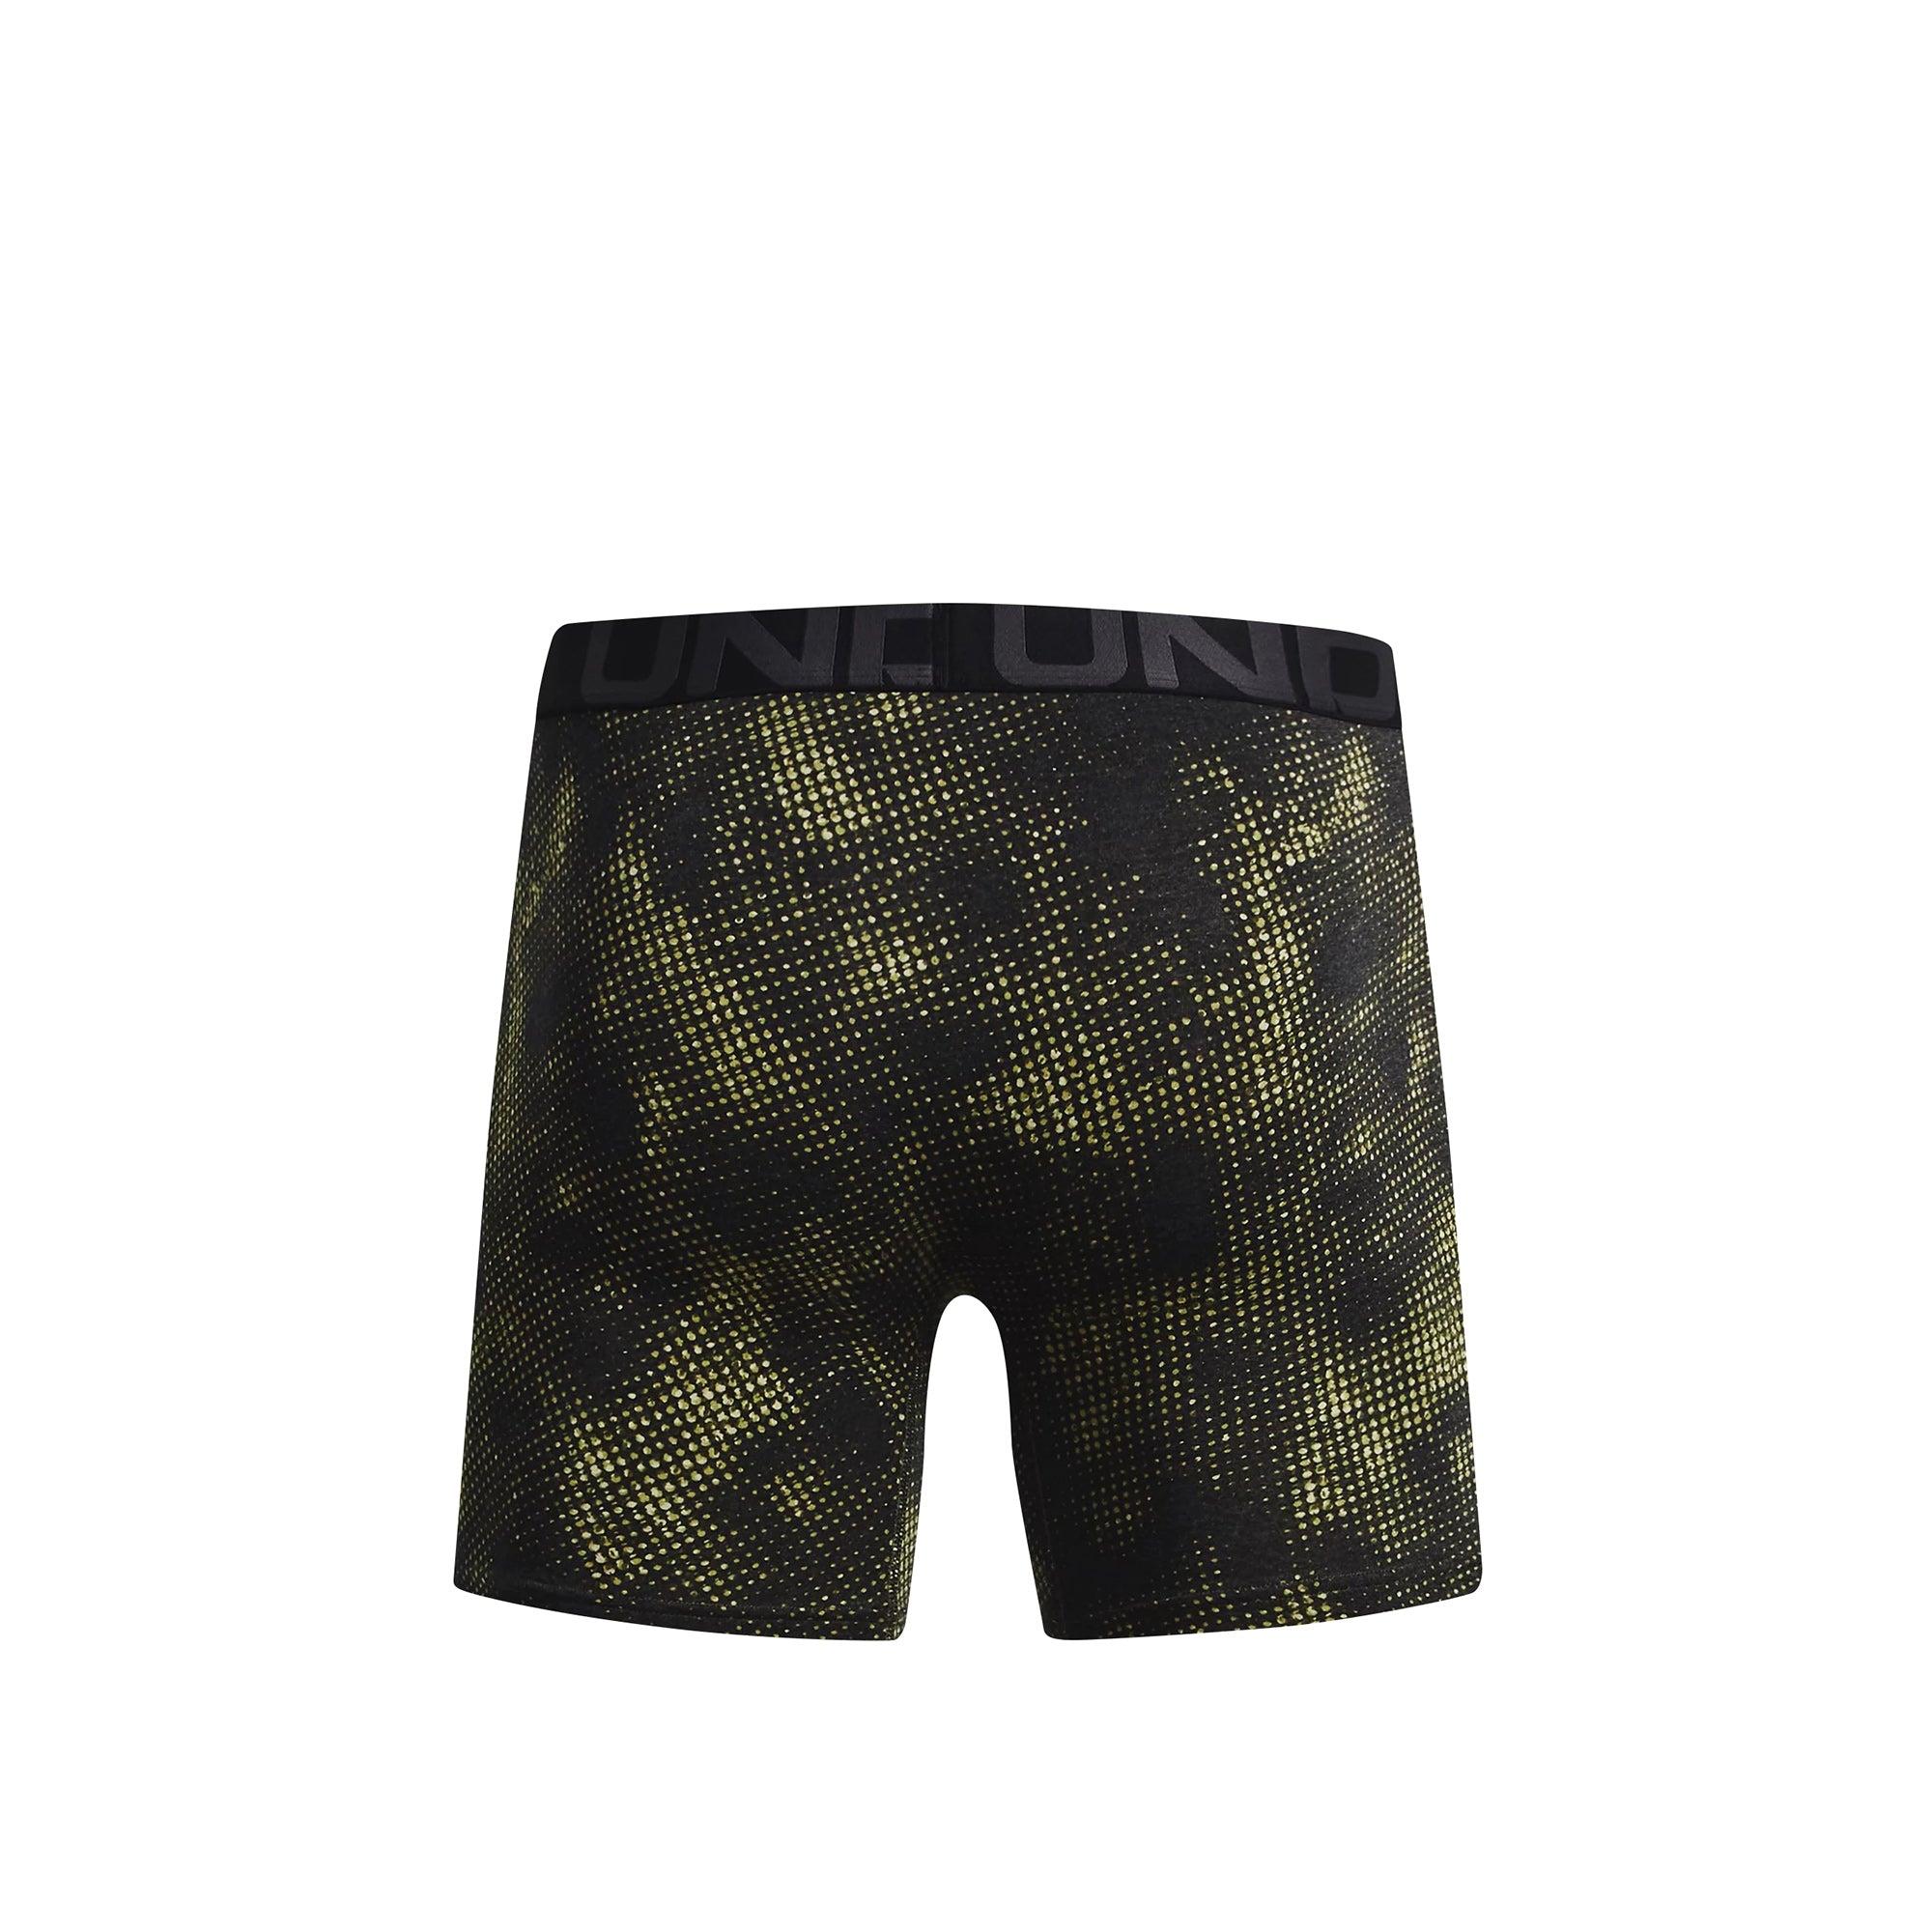 Đồ lót thể thao nam Under Armour Cc 6In Novelty 3 Pack - 1363615-005